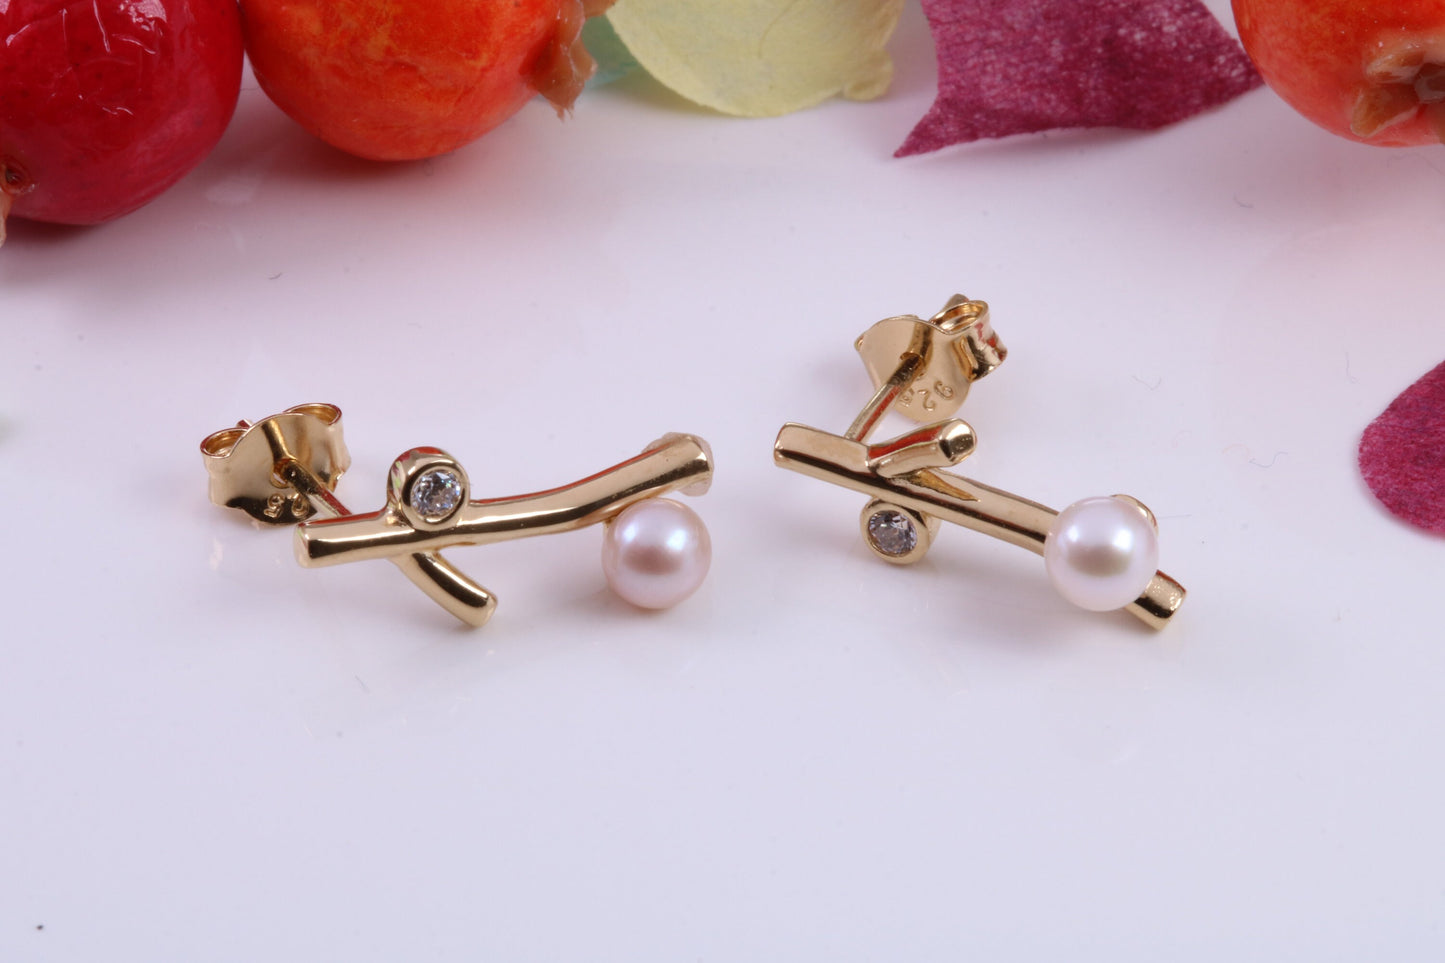 16 mm Long Pearl and Cubic Zirconia set Earrings, Made from Solid 925 Grade Sterling Silver and 18ct Yellow Gold Plated